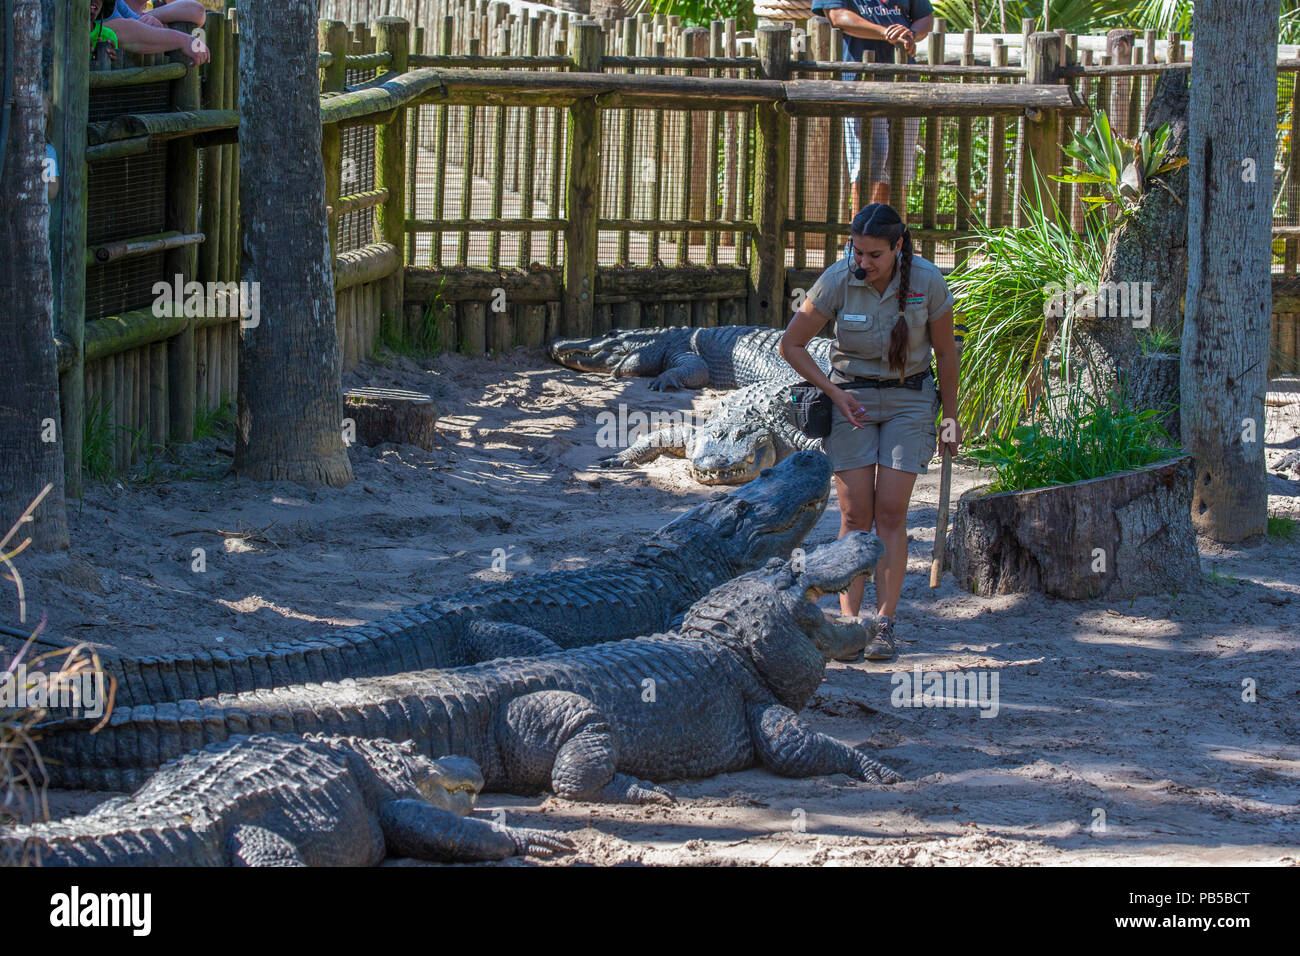 Woman giving Alligator talk at St. Augustine Alligator Farm Zoological Park in St Augustine Florida Stock Photo